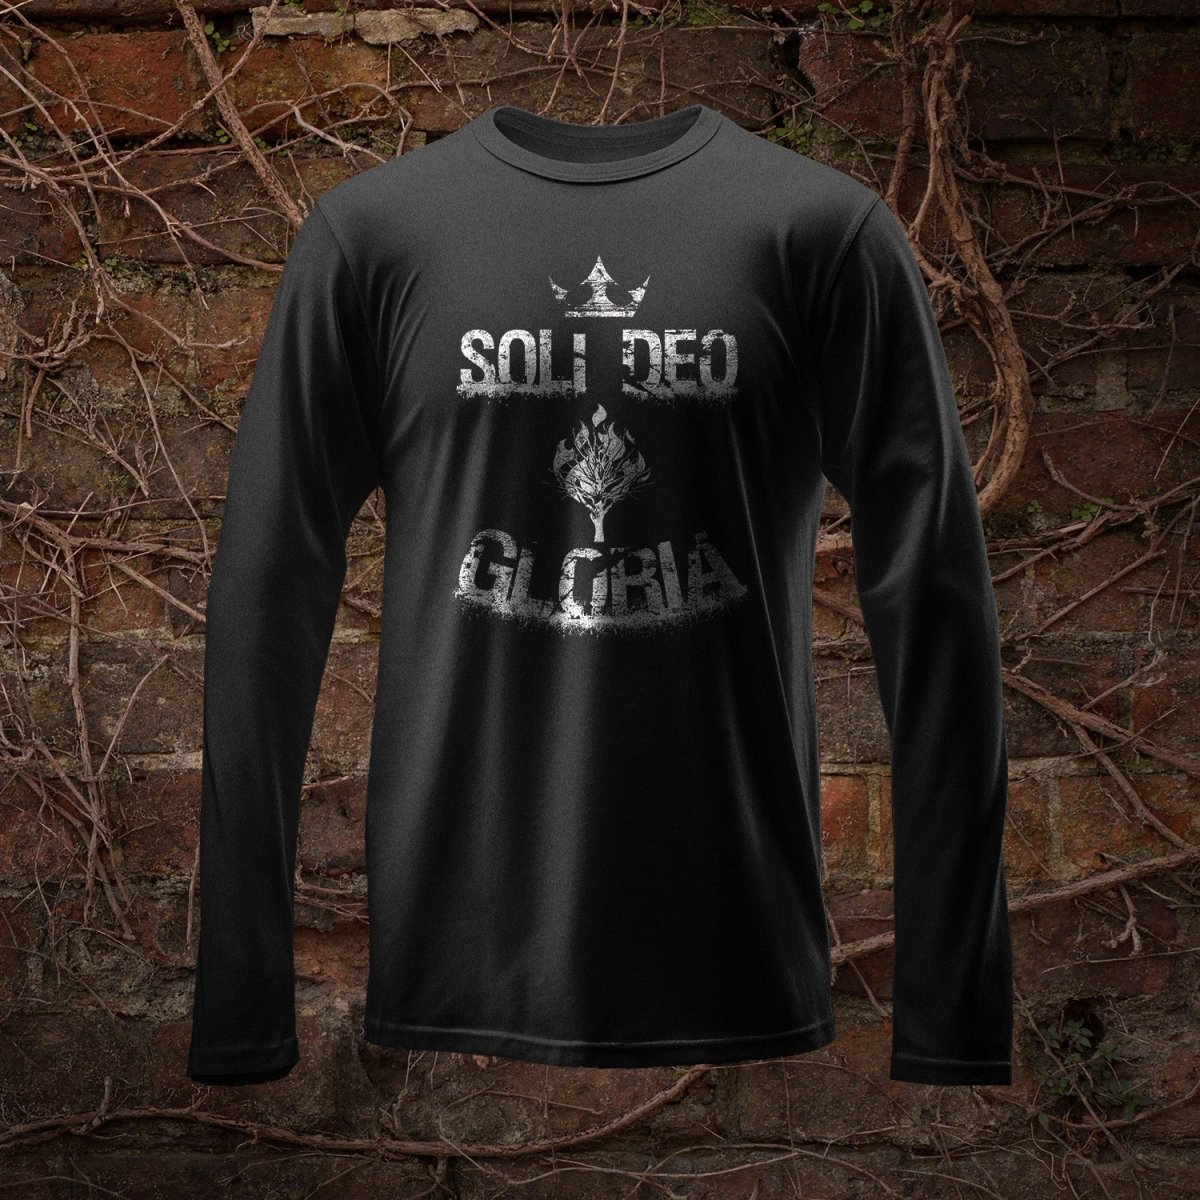 LS - Soli Deo Gloria Grunge - Long Sleeve Tee - The Reformed Sage - #reformed# - #reformed_gifts# - #christian_gifts#